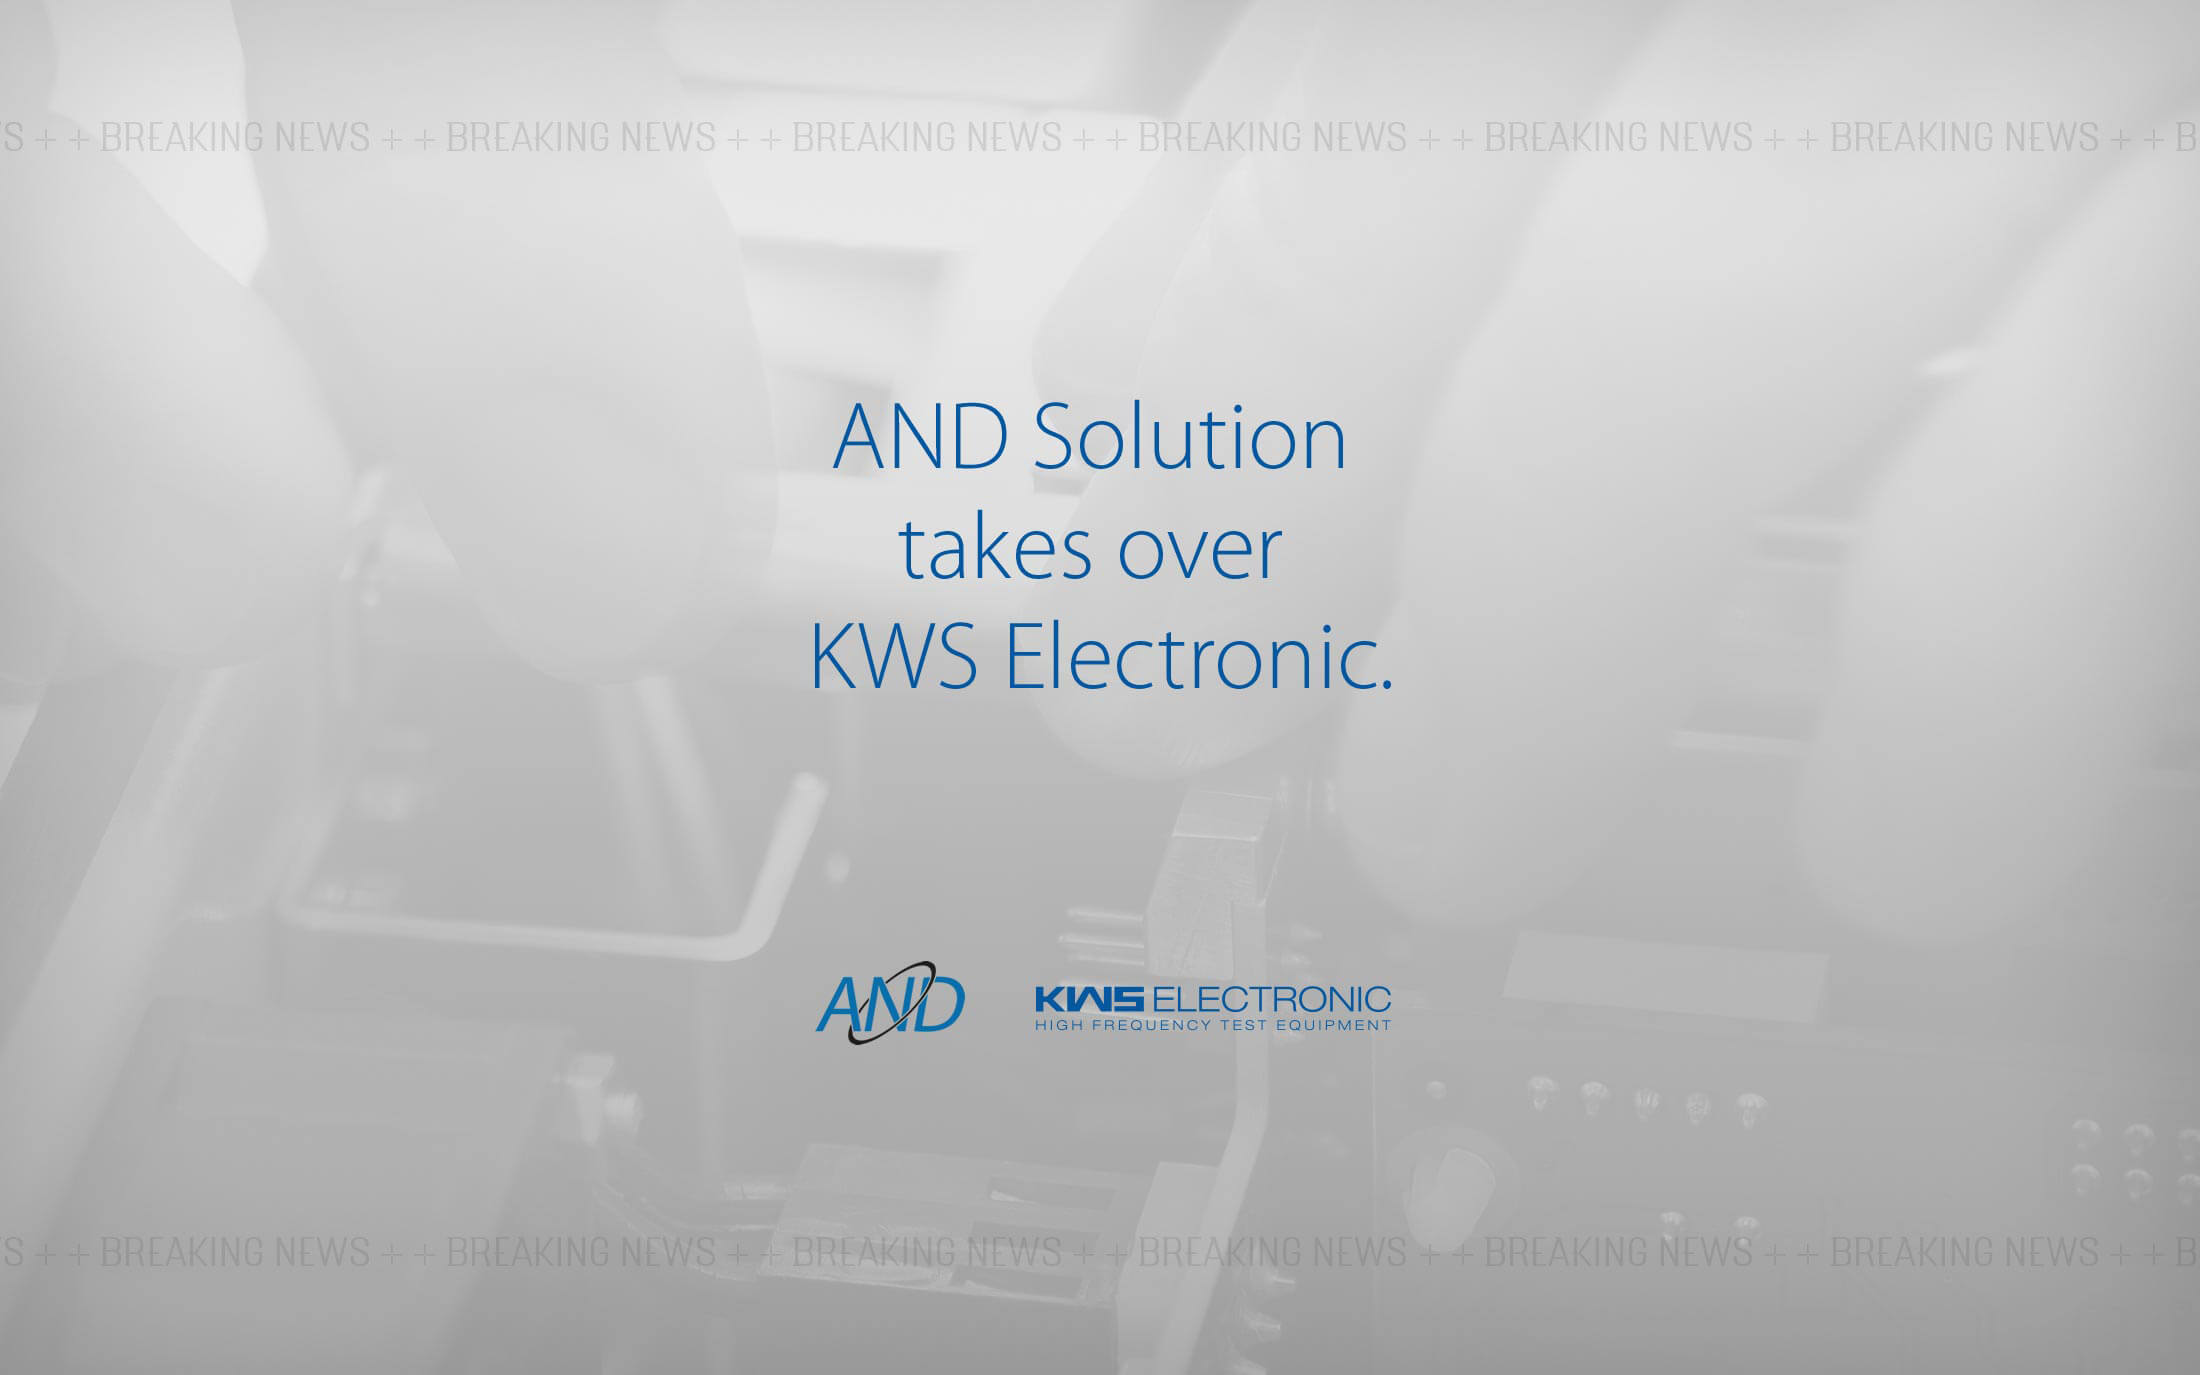 KWS-Electronic News 2018: AND Solution takes over KWS Electronic